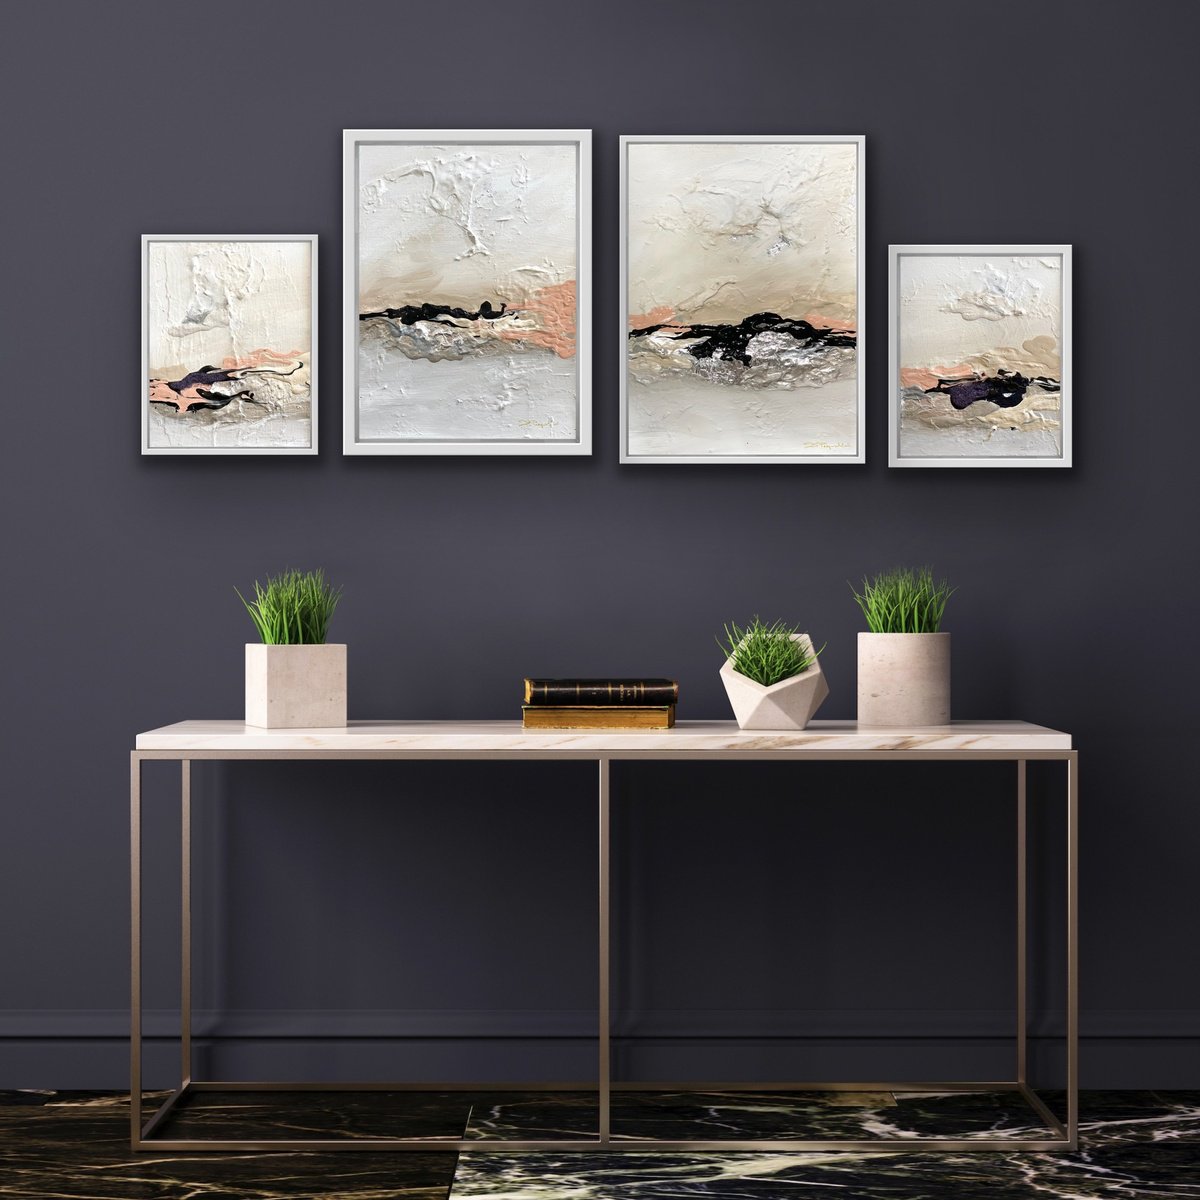 Poetic Landscape - Peach , White, Black - Composition 4 paintings framed - Wall Art Ready... by Daniela Pasqualini